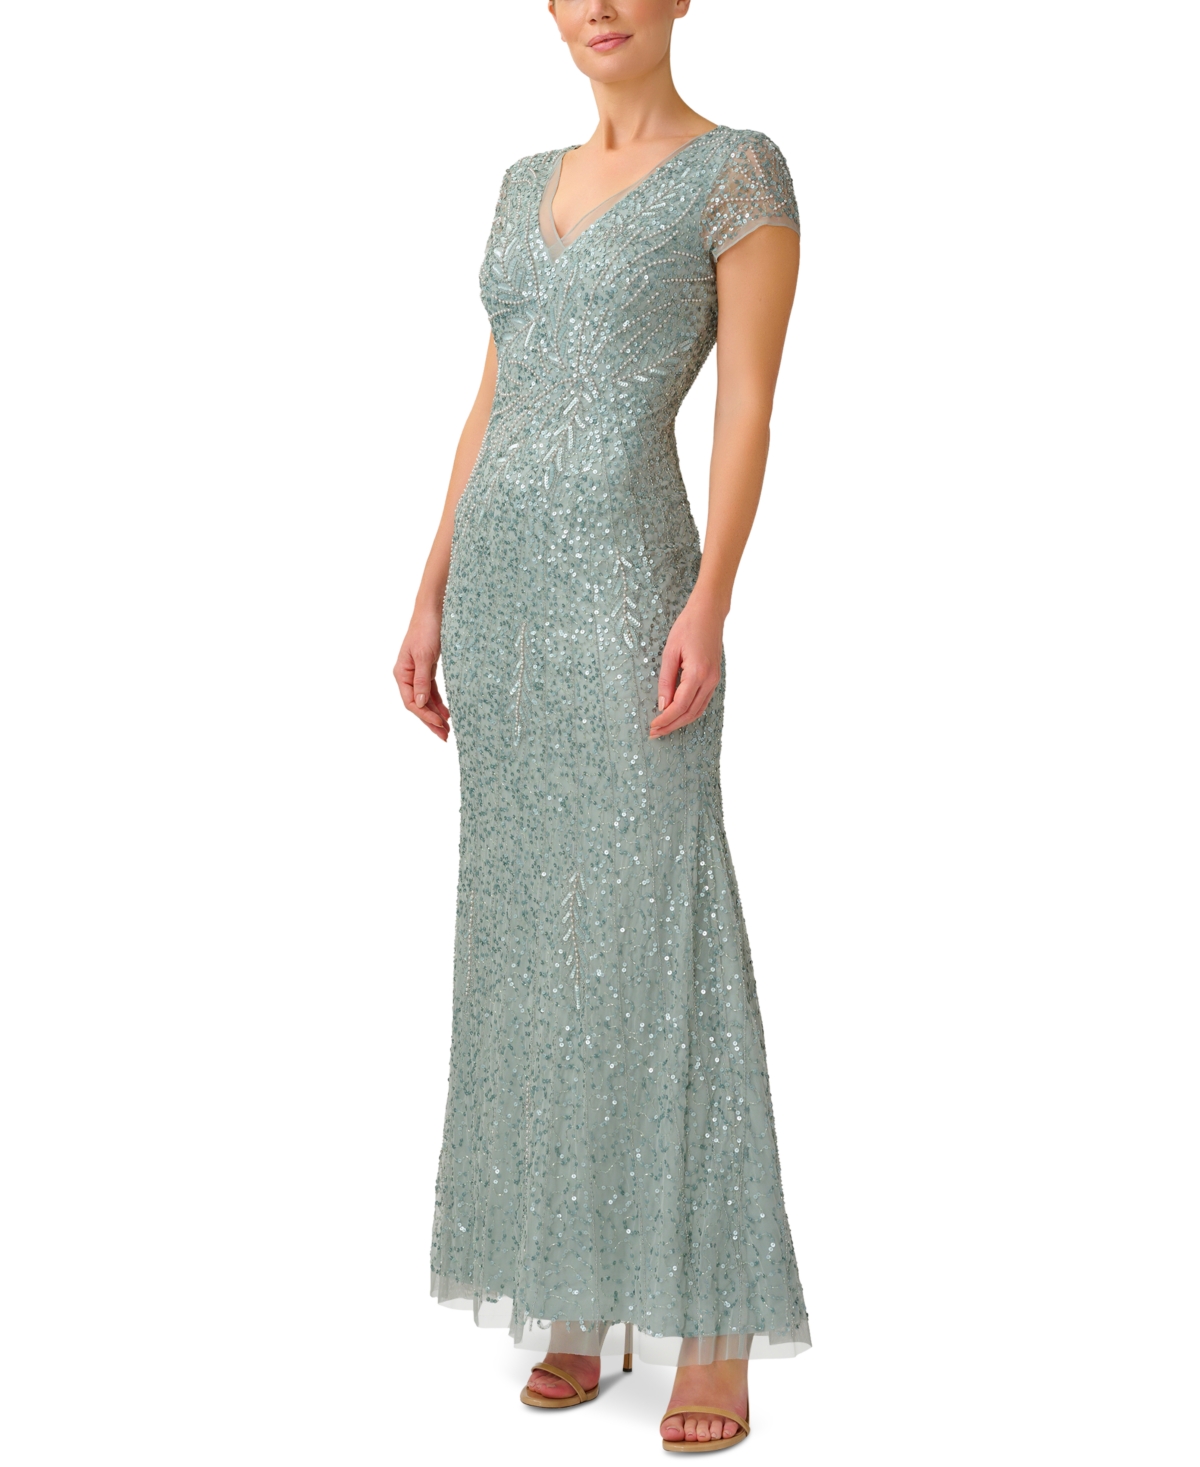 ADRIANNA PAPELL WOMEN'S BEADED SEQUIN MERMAID GOWN